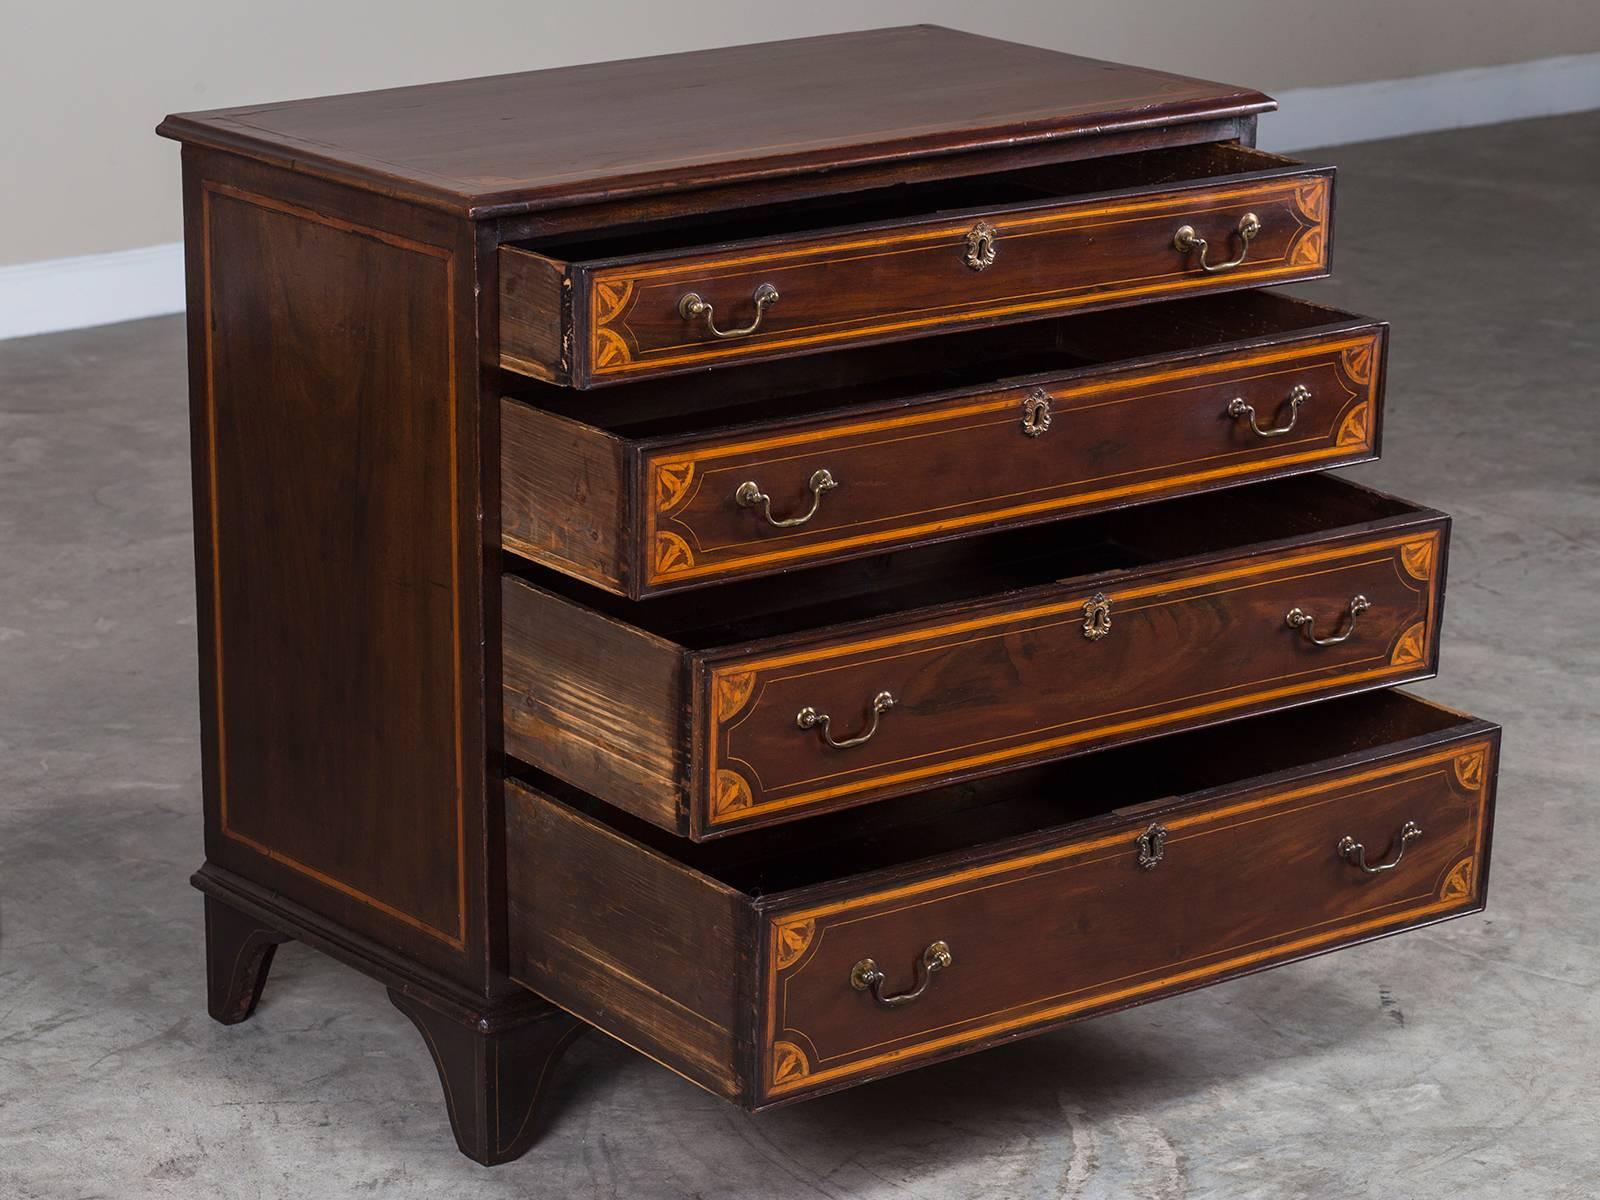 19th Century Antique English Neoclassical Mahogany Chest of Drawers, circa 1860